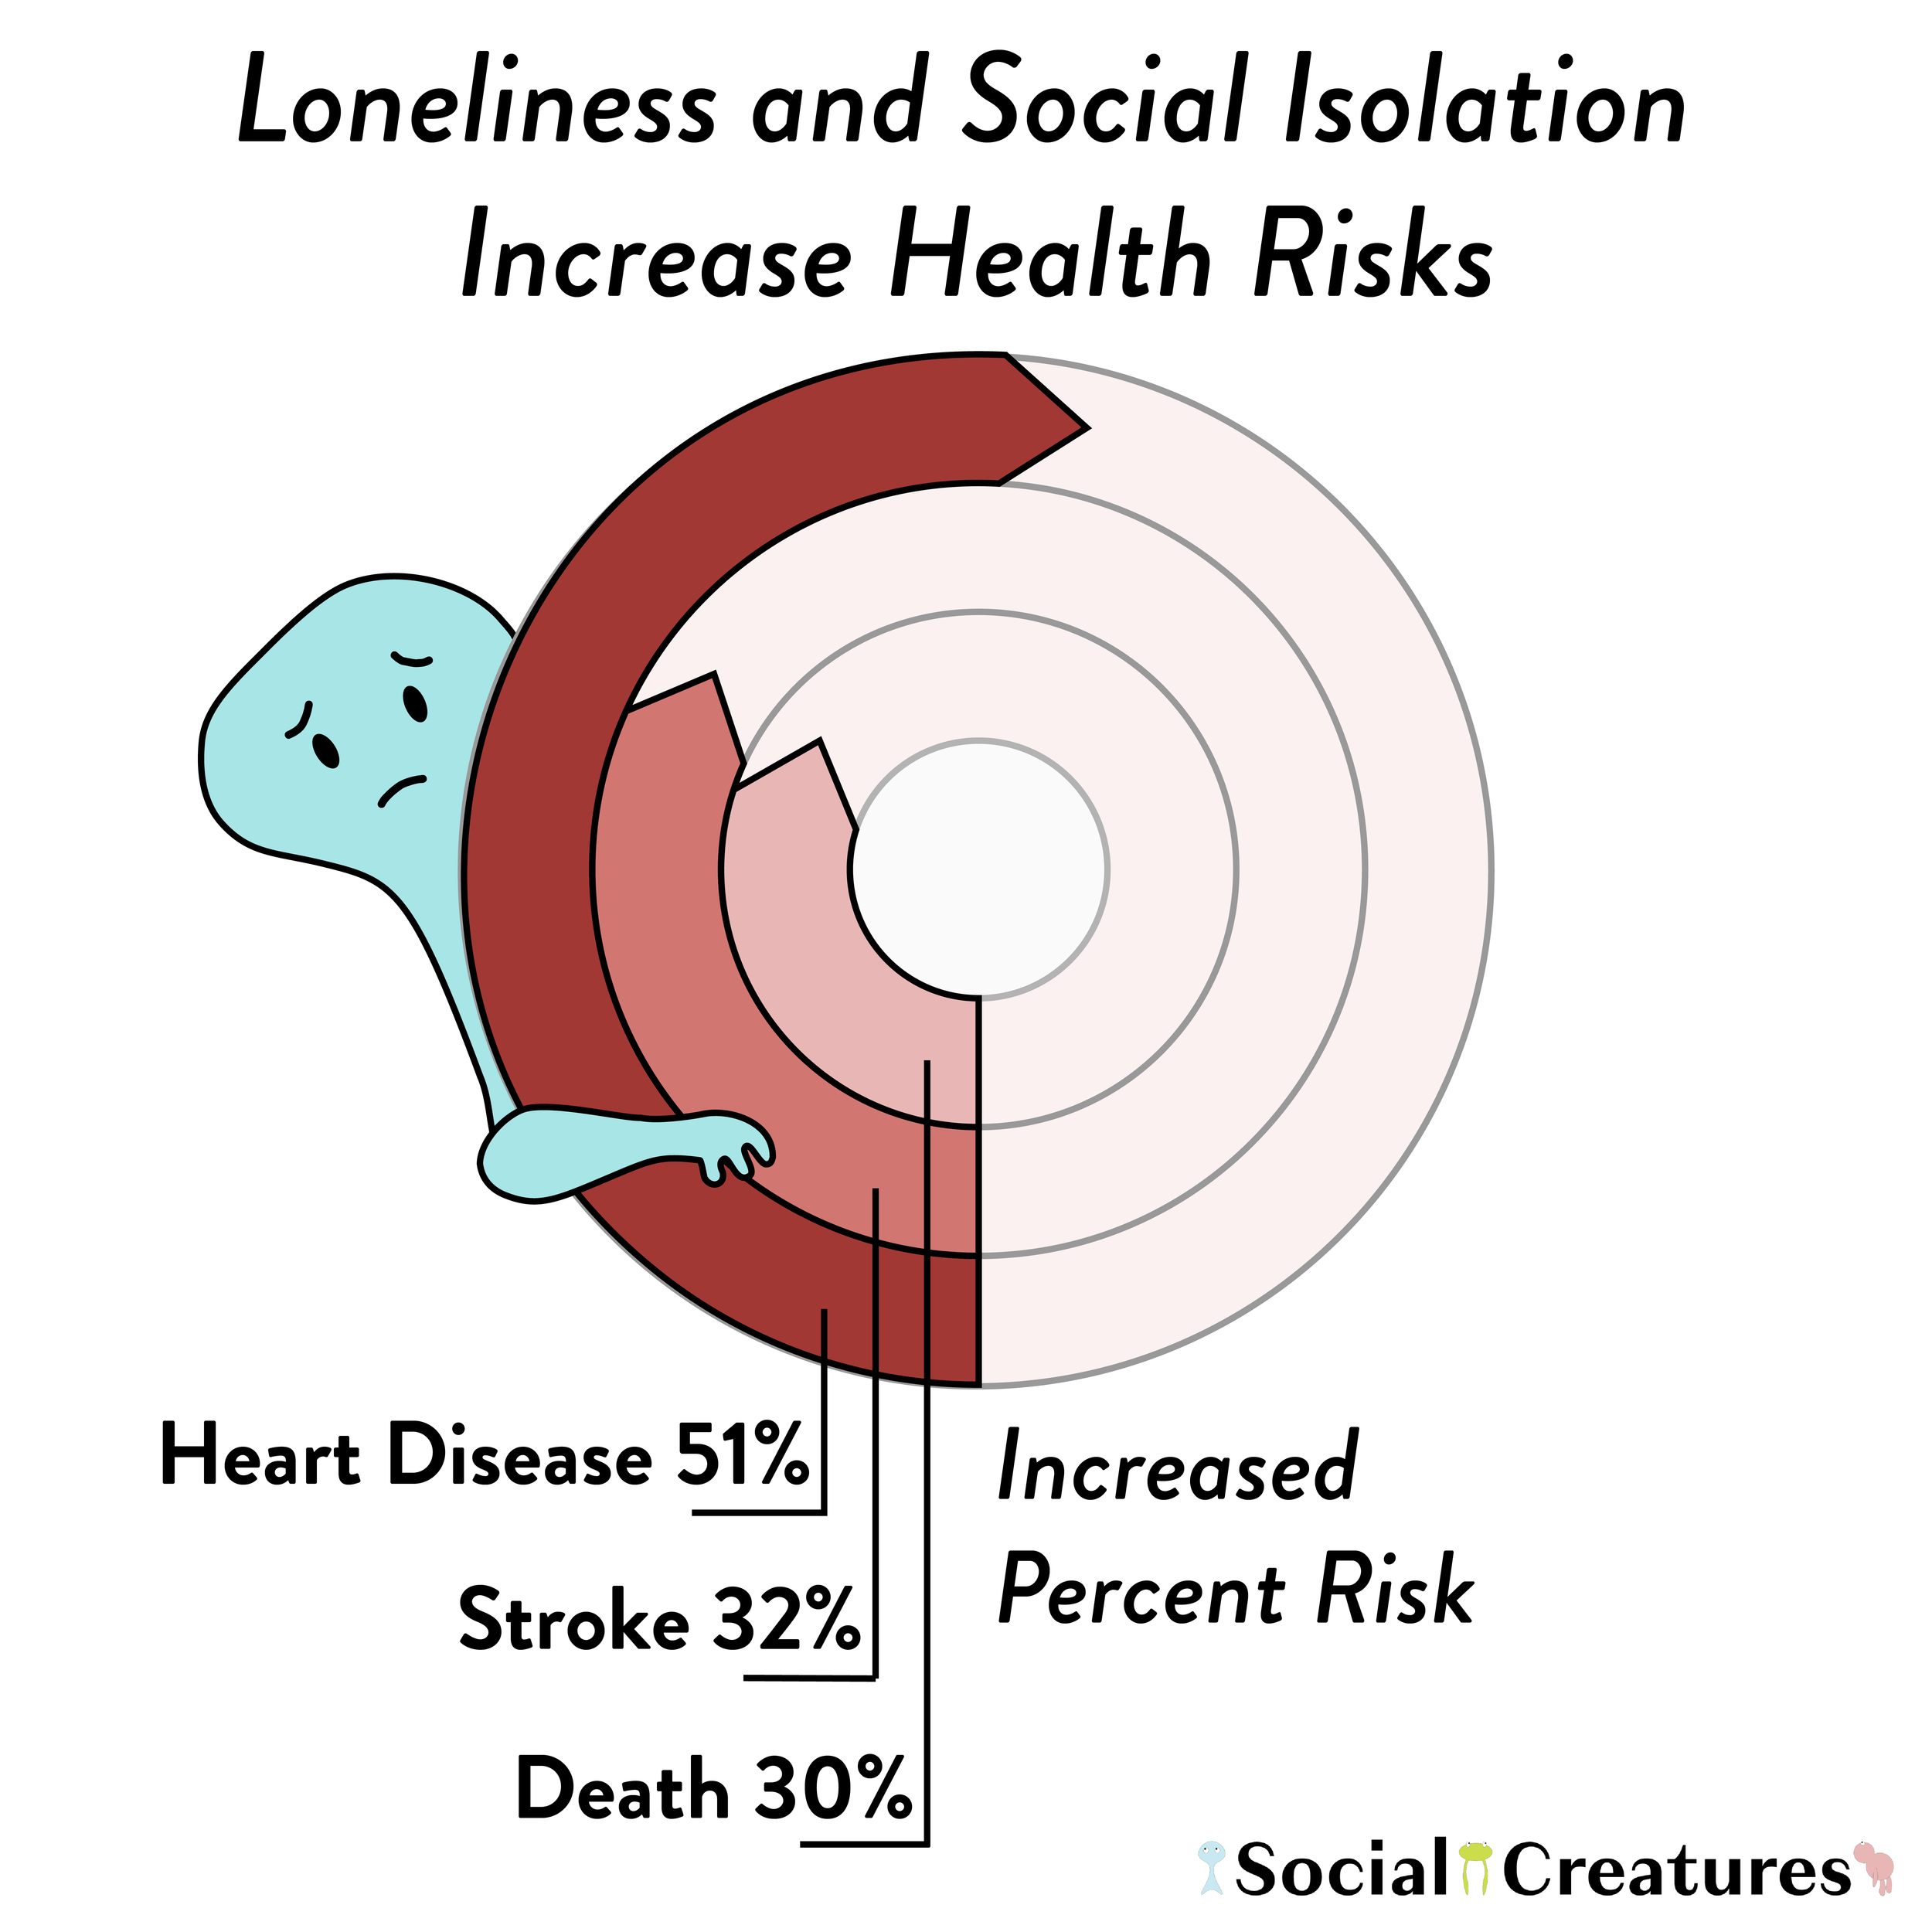 Why does social isolation increase mortality risk?